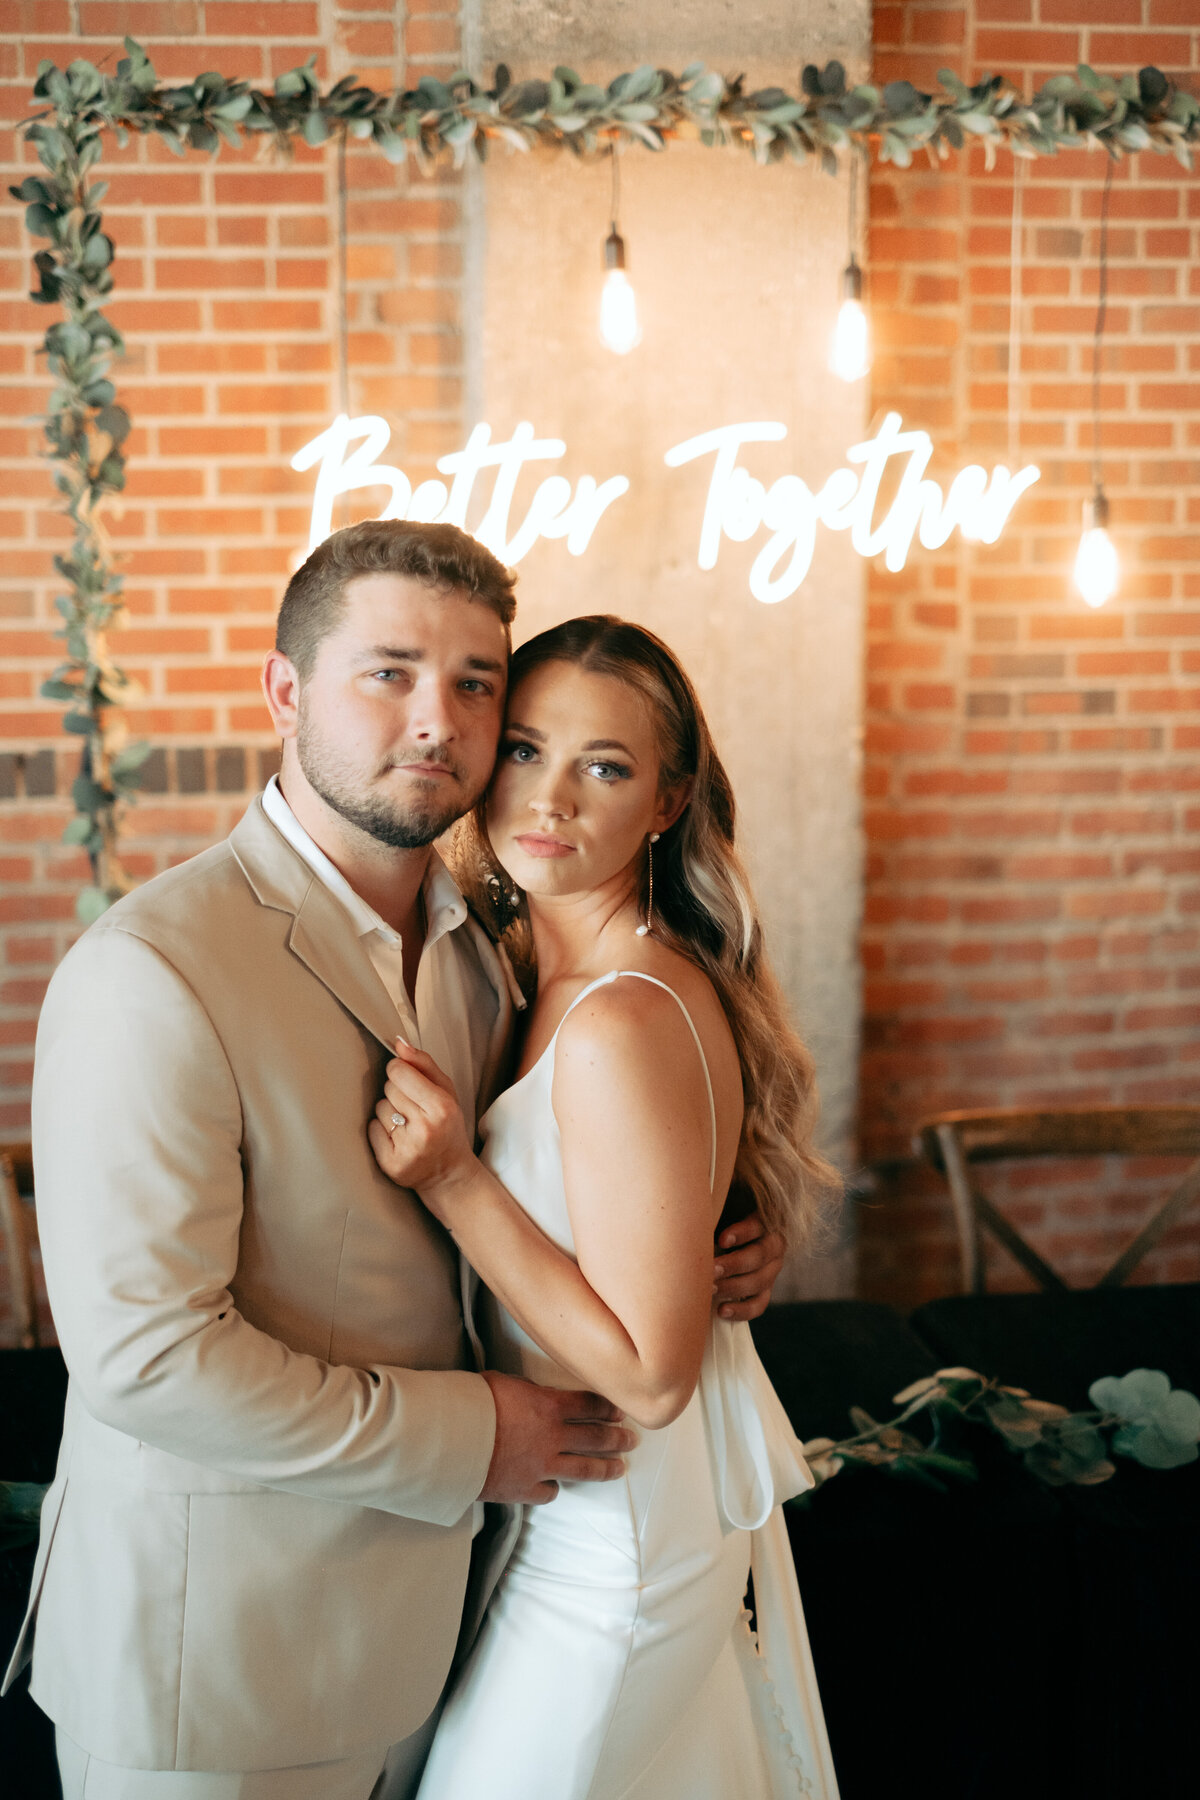 Bride and Groom Portrait in front of Better Together Neon Sign | The Axmanns